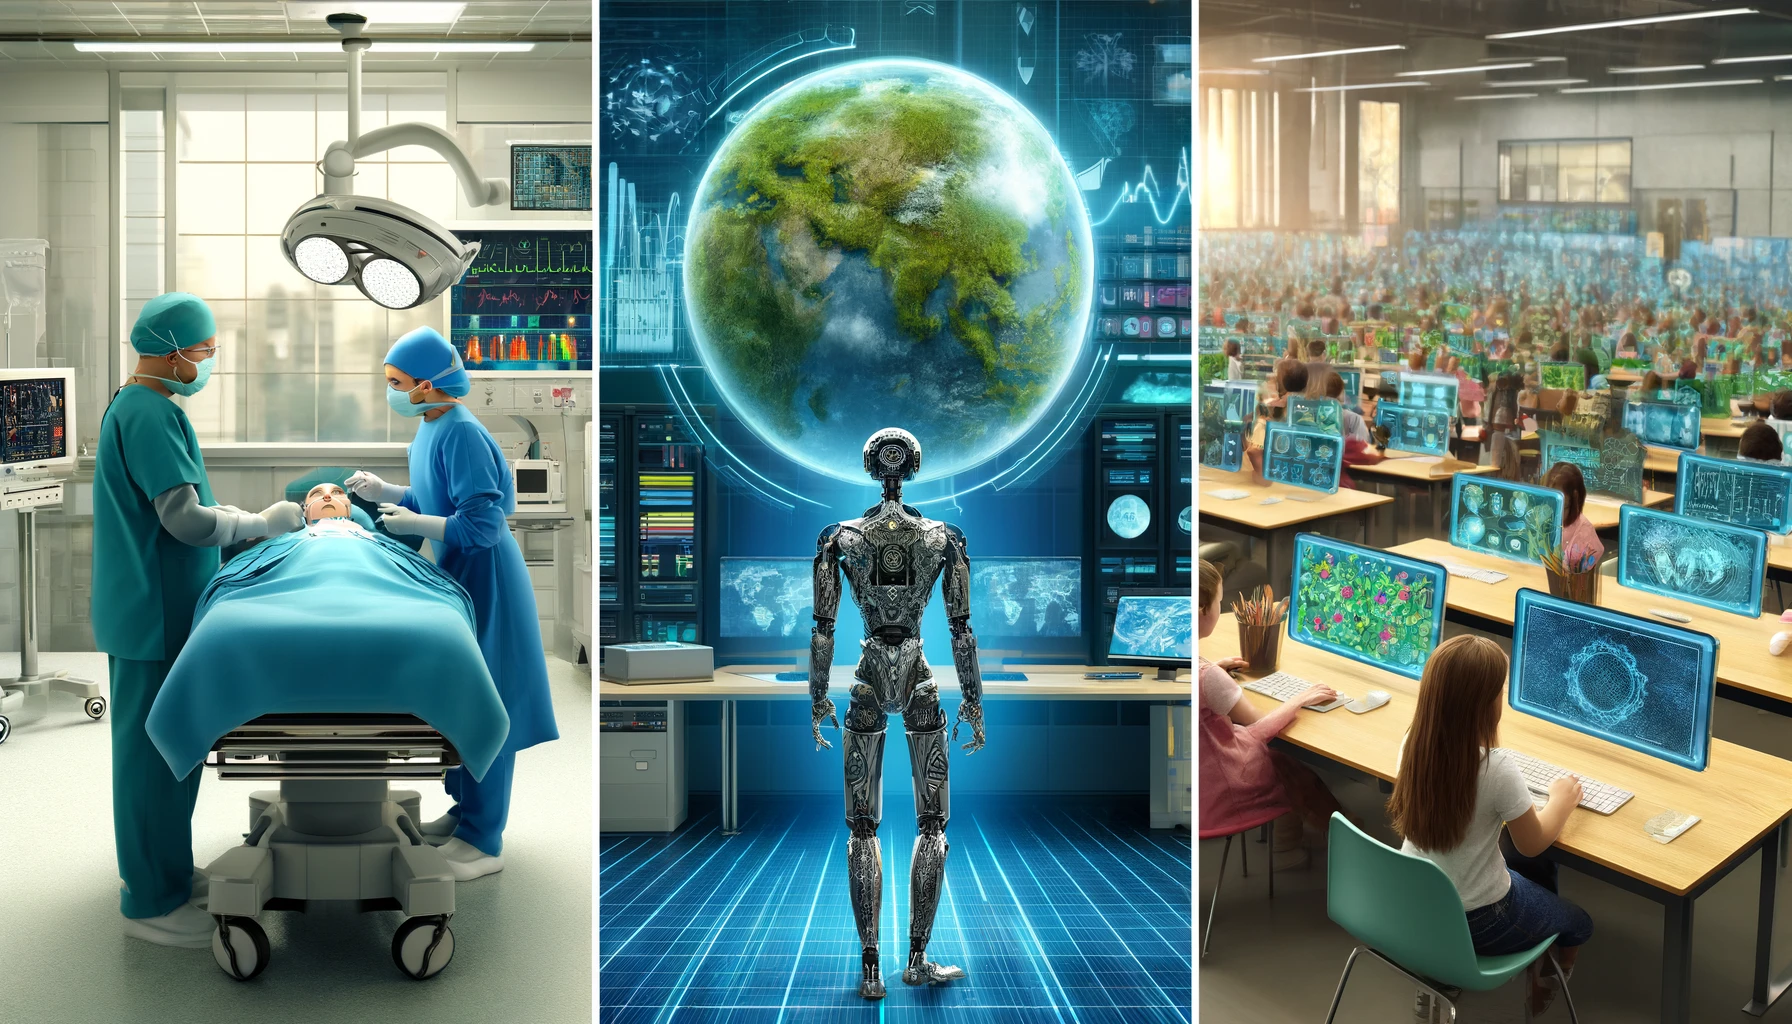 A-series-of-three-impactful-images-depicting-how-artificial-intelligence-is-affecting-the-world_-1.-__Healthcare___-A-modern-hospital-room-where-a-rob.